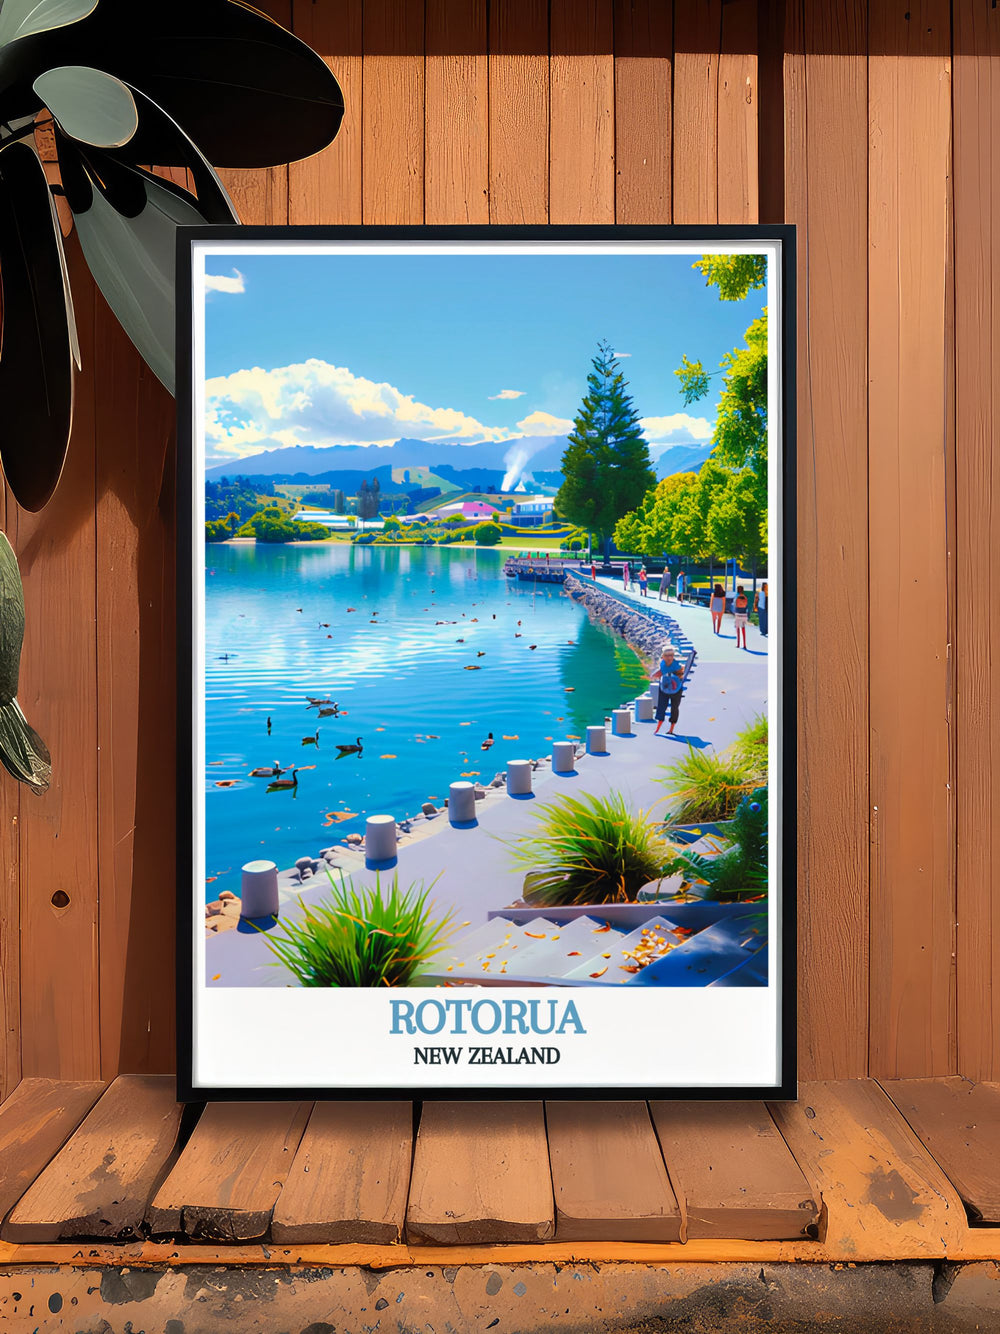 Beautiful Lake Rotorua prints showcasing the breathtaking scenery of Rotorua New Zealand. This artwork is perfect for nature lovers and makes a thoughtful gift for any occasion. Enhance your space with this exquisite piece of New Zealand wall art.